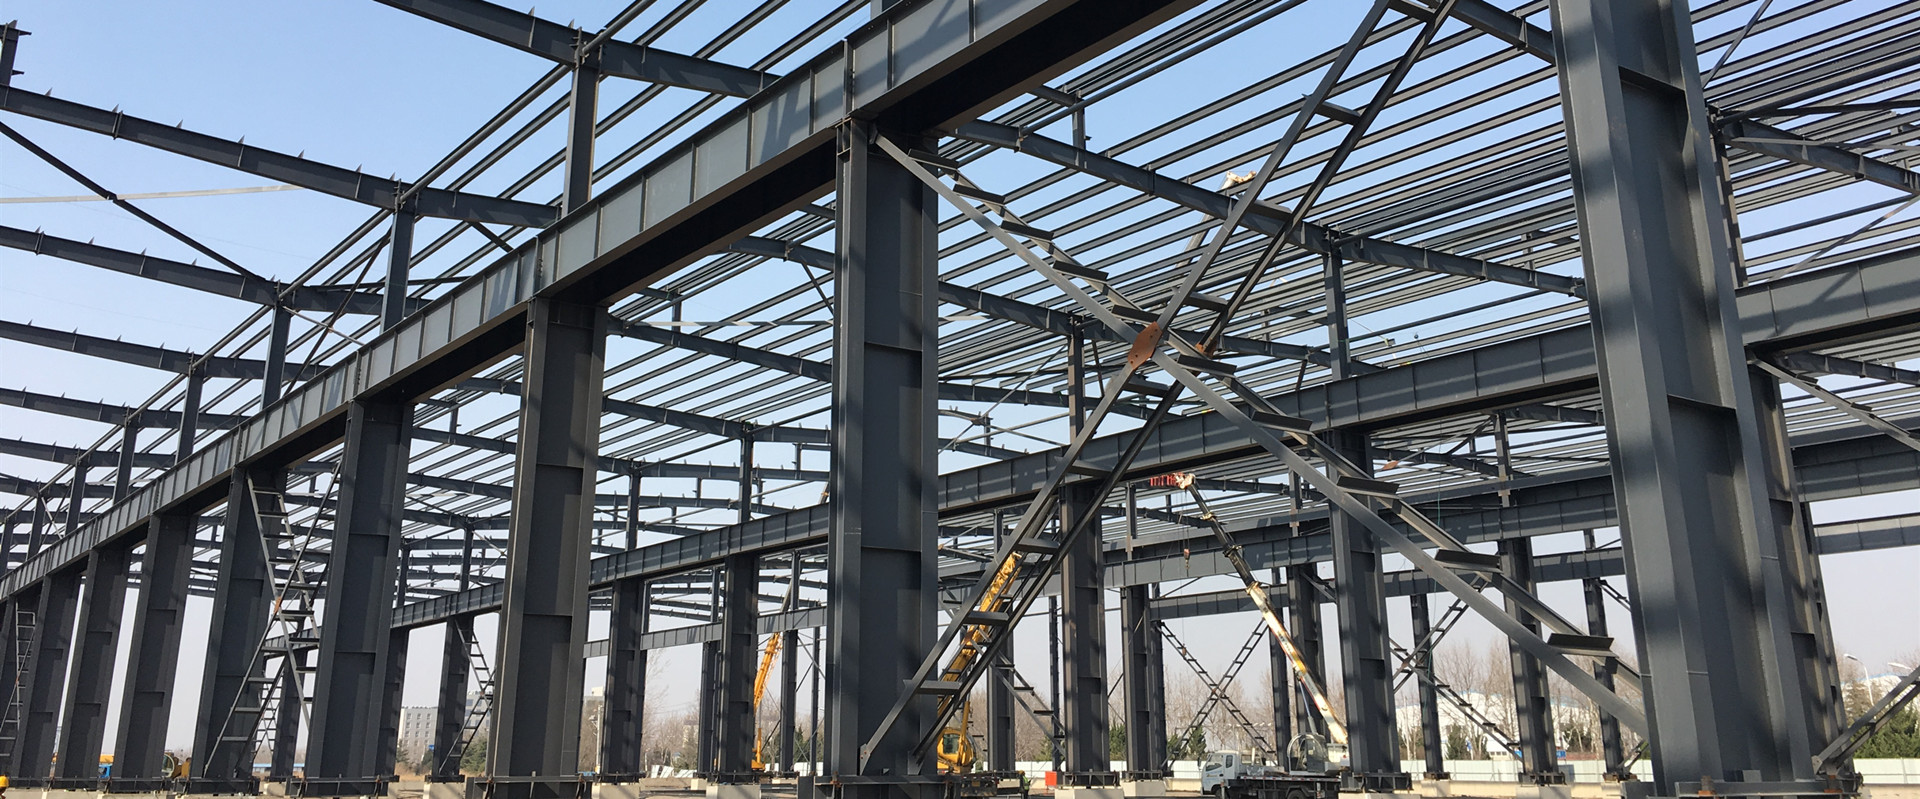 Main steel structure